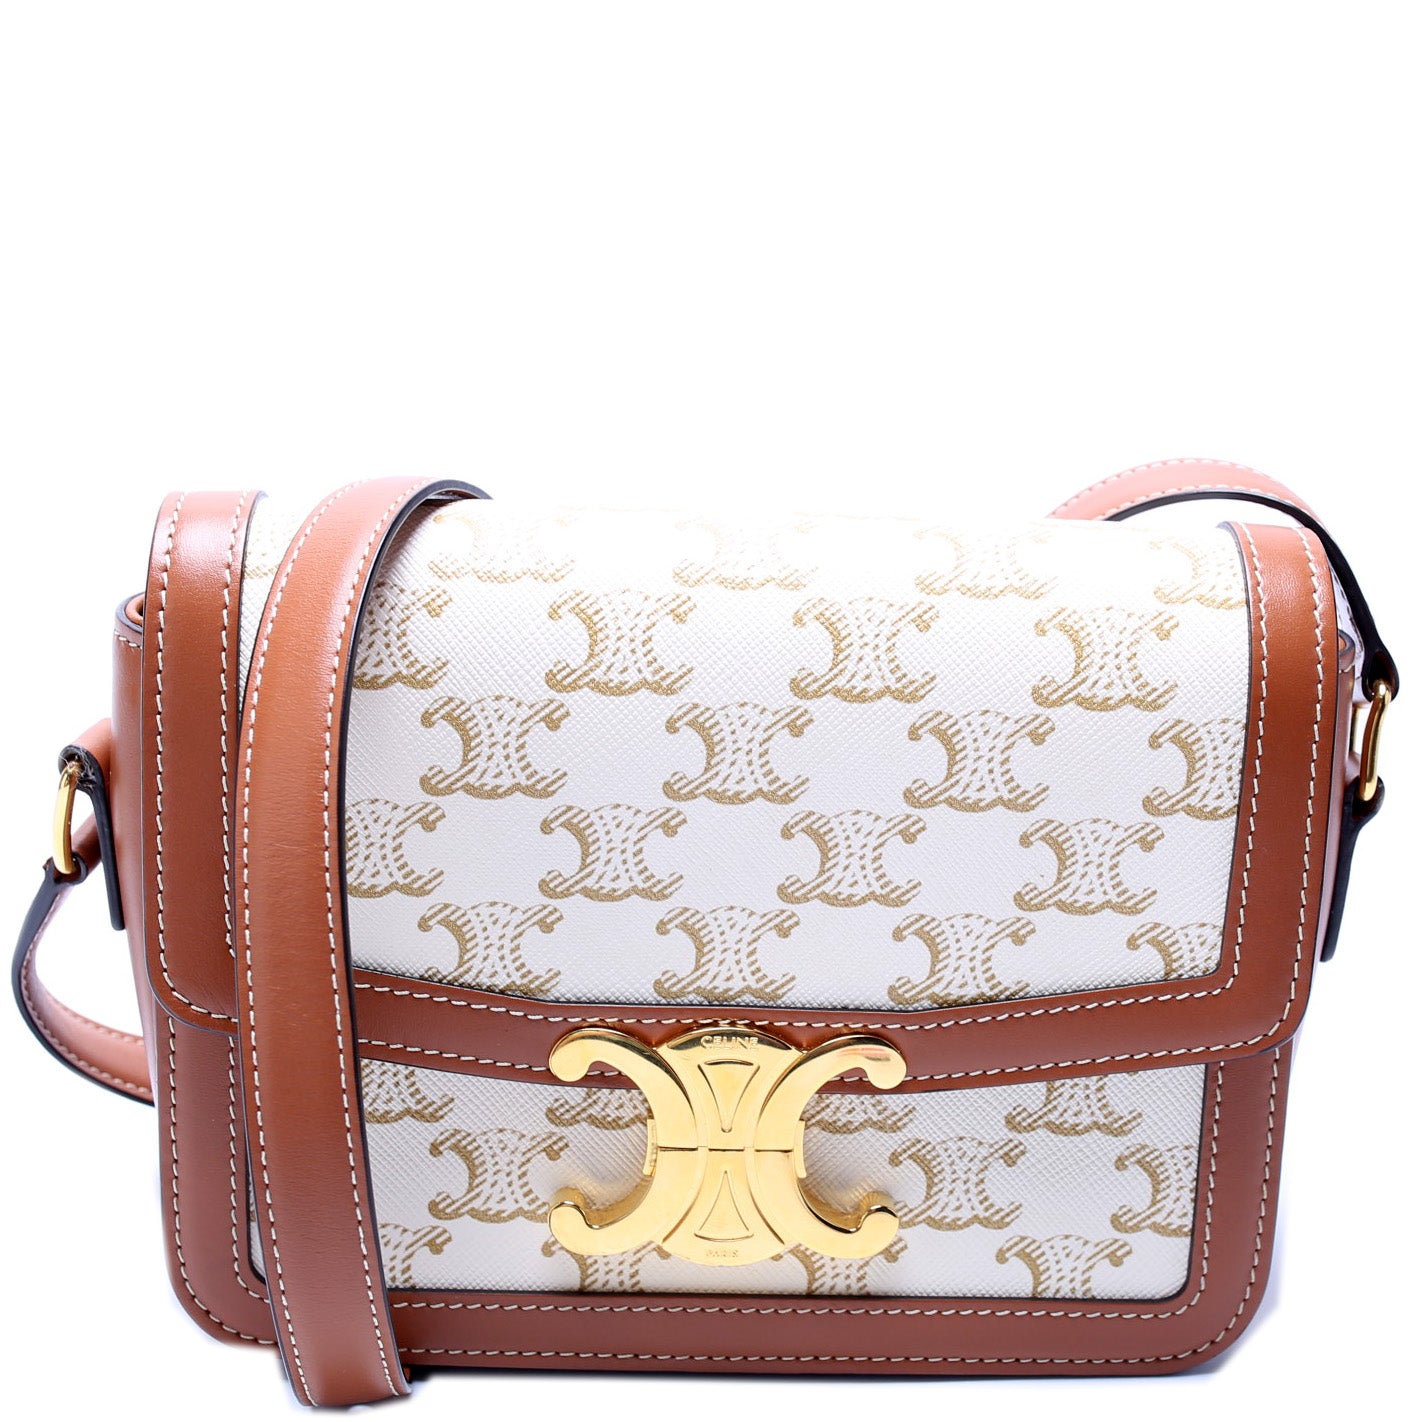 TEEN TRIOMPHE BAG IN TRIOMPHE CANVAS AND CALFSKIN - WHITE